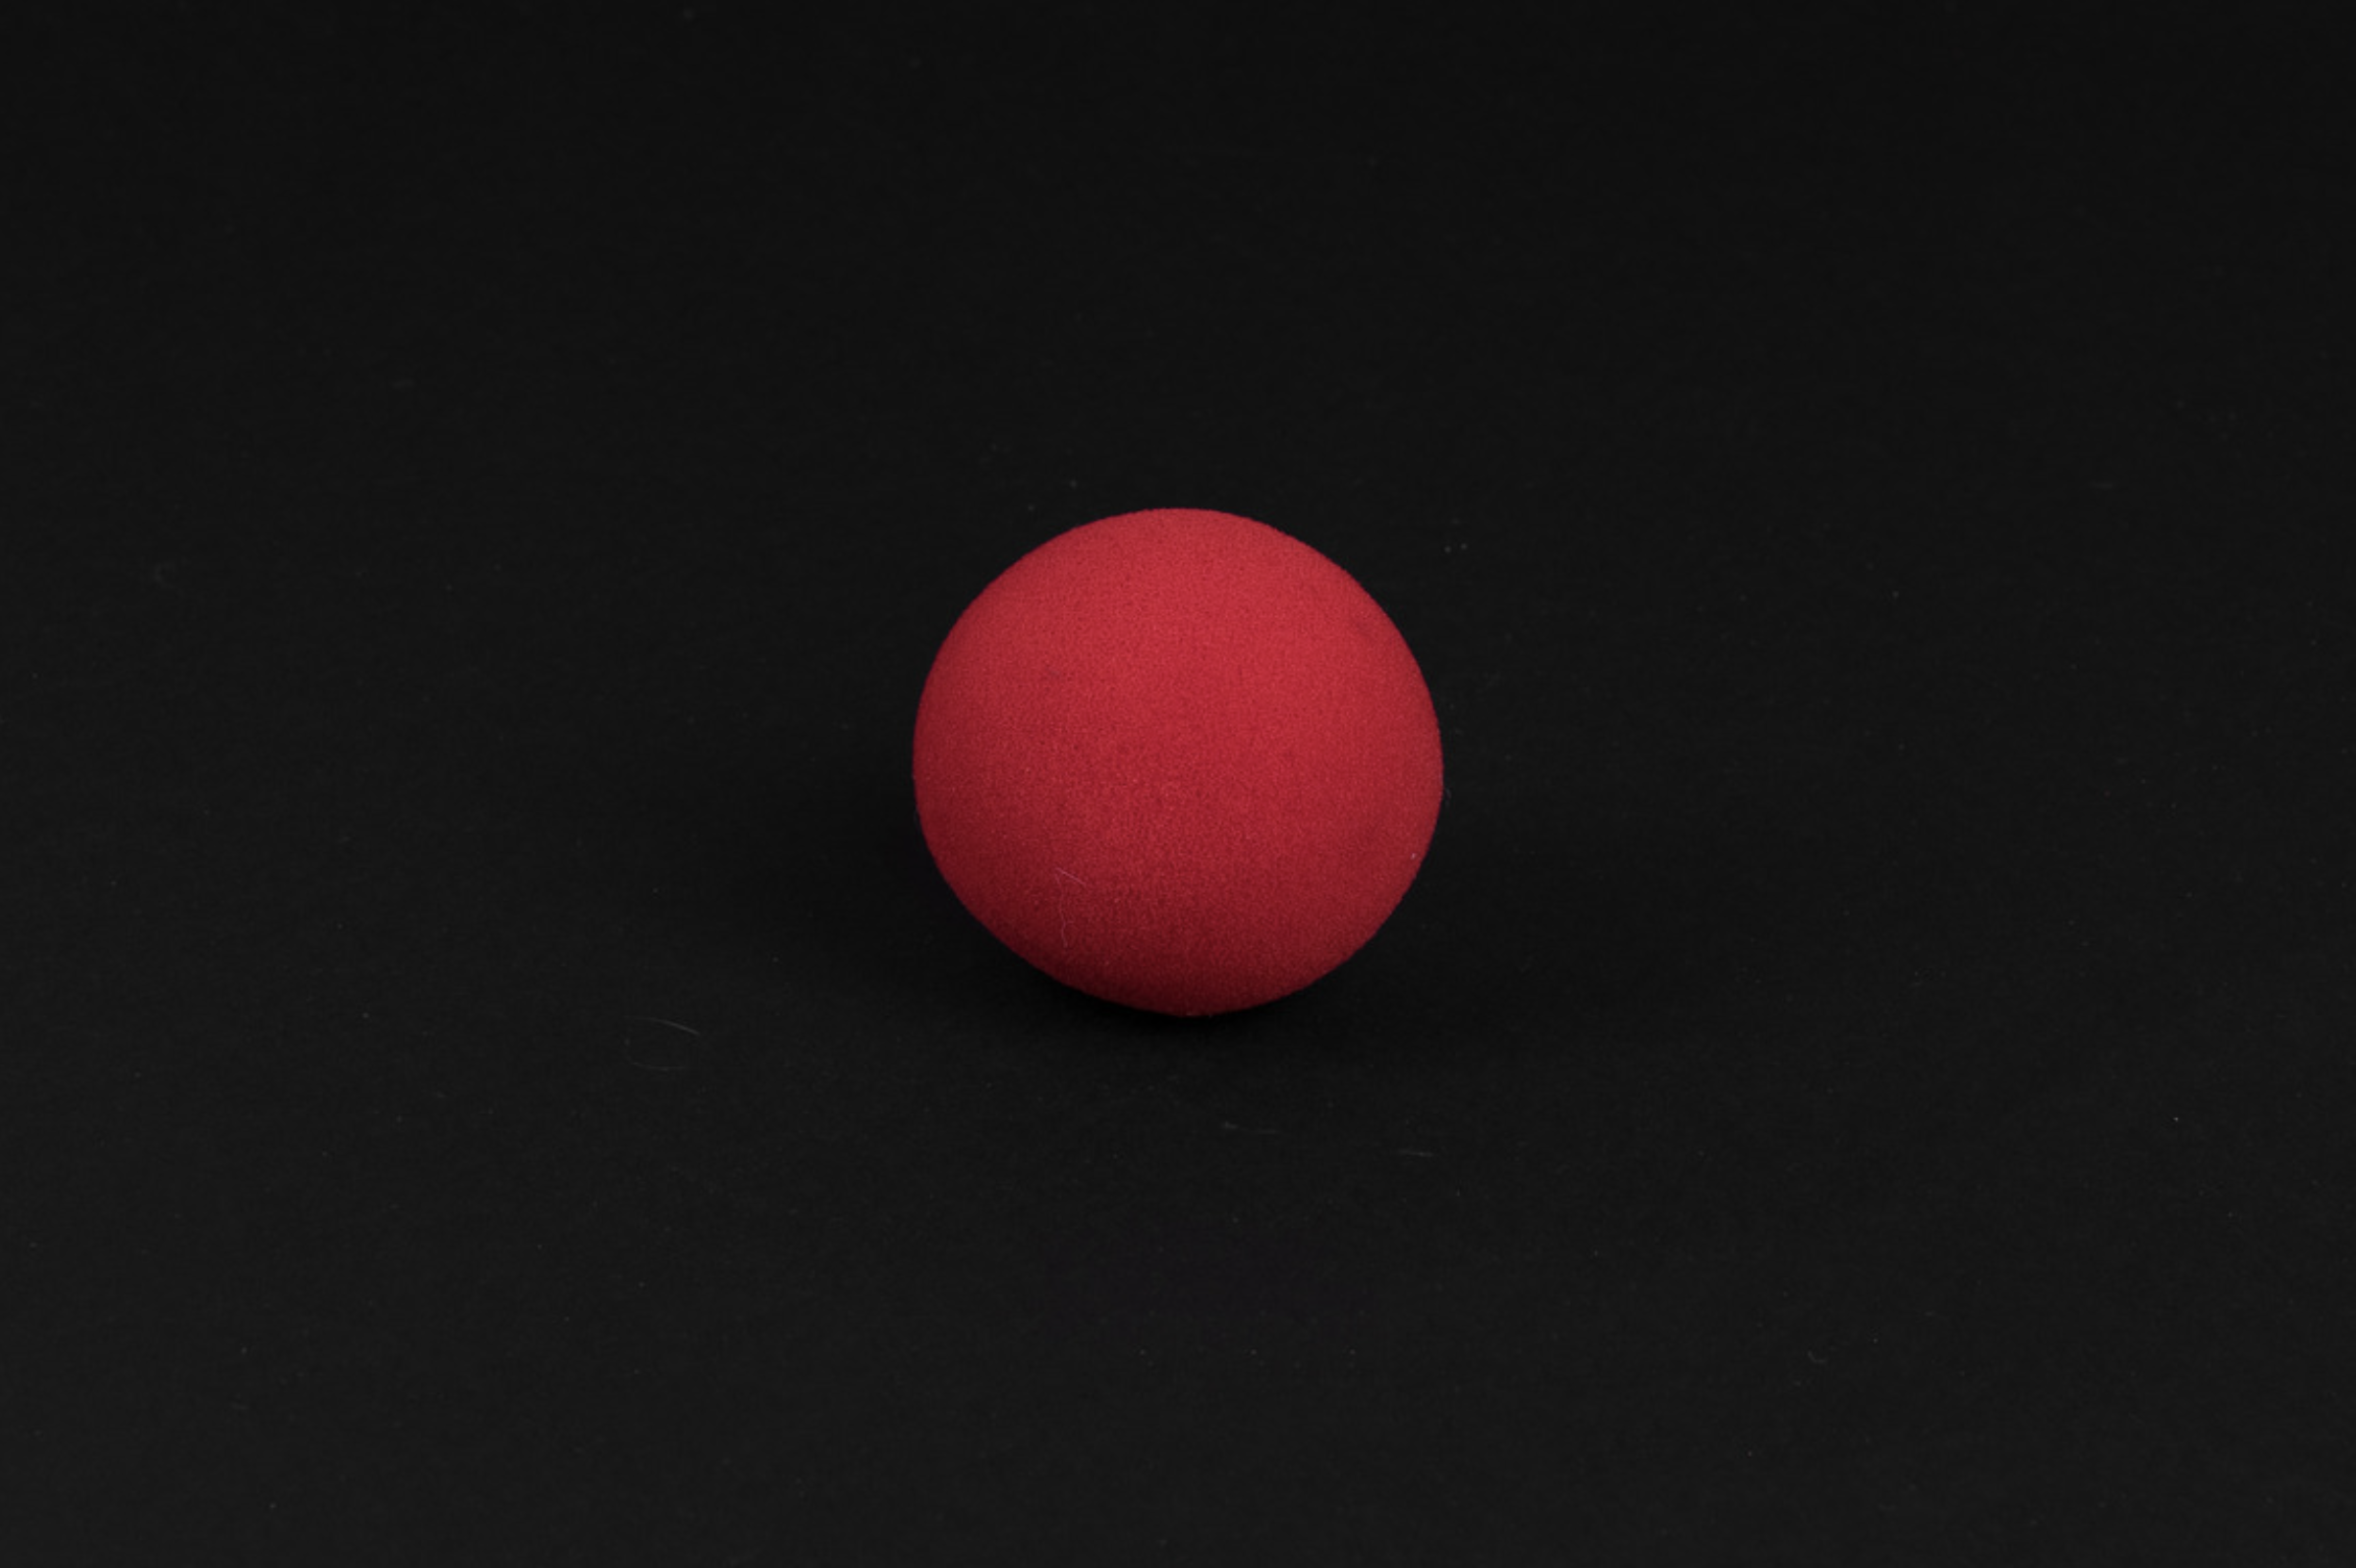 Picture of a red clown nose on a black background.